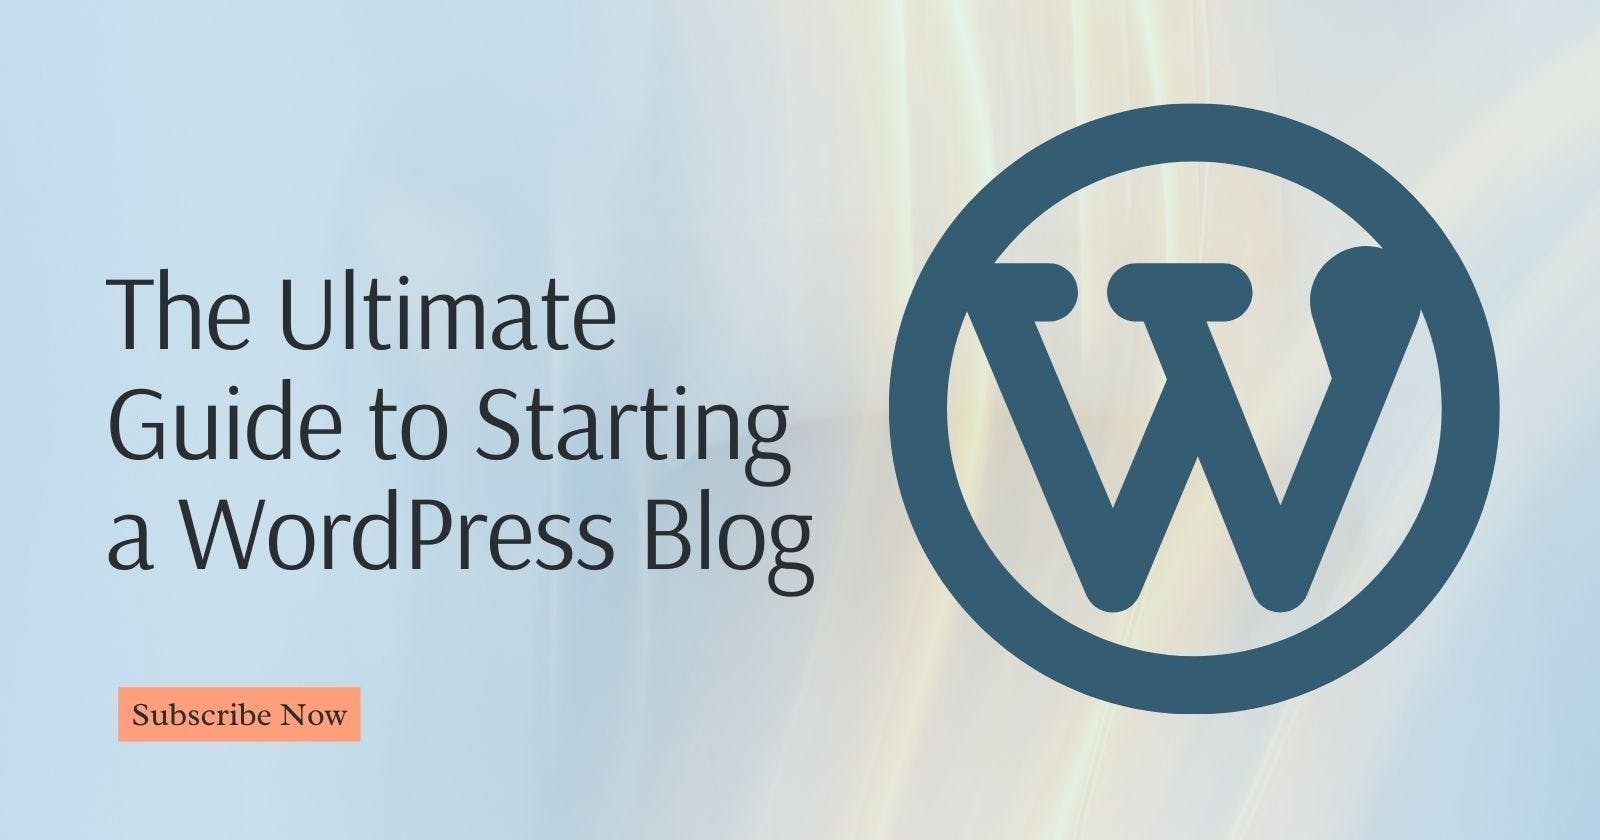 The Ultimate Guide to Starting a WordPress Blog: Step-by-Step Guide